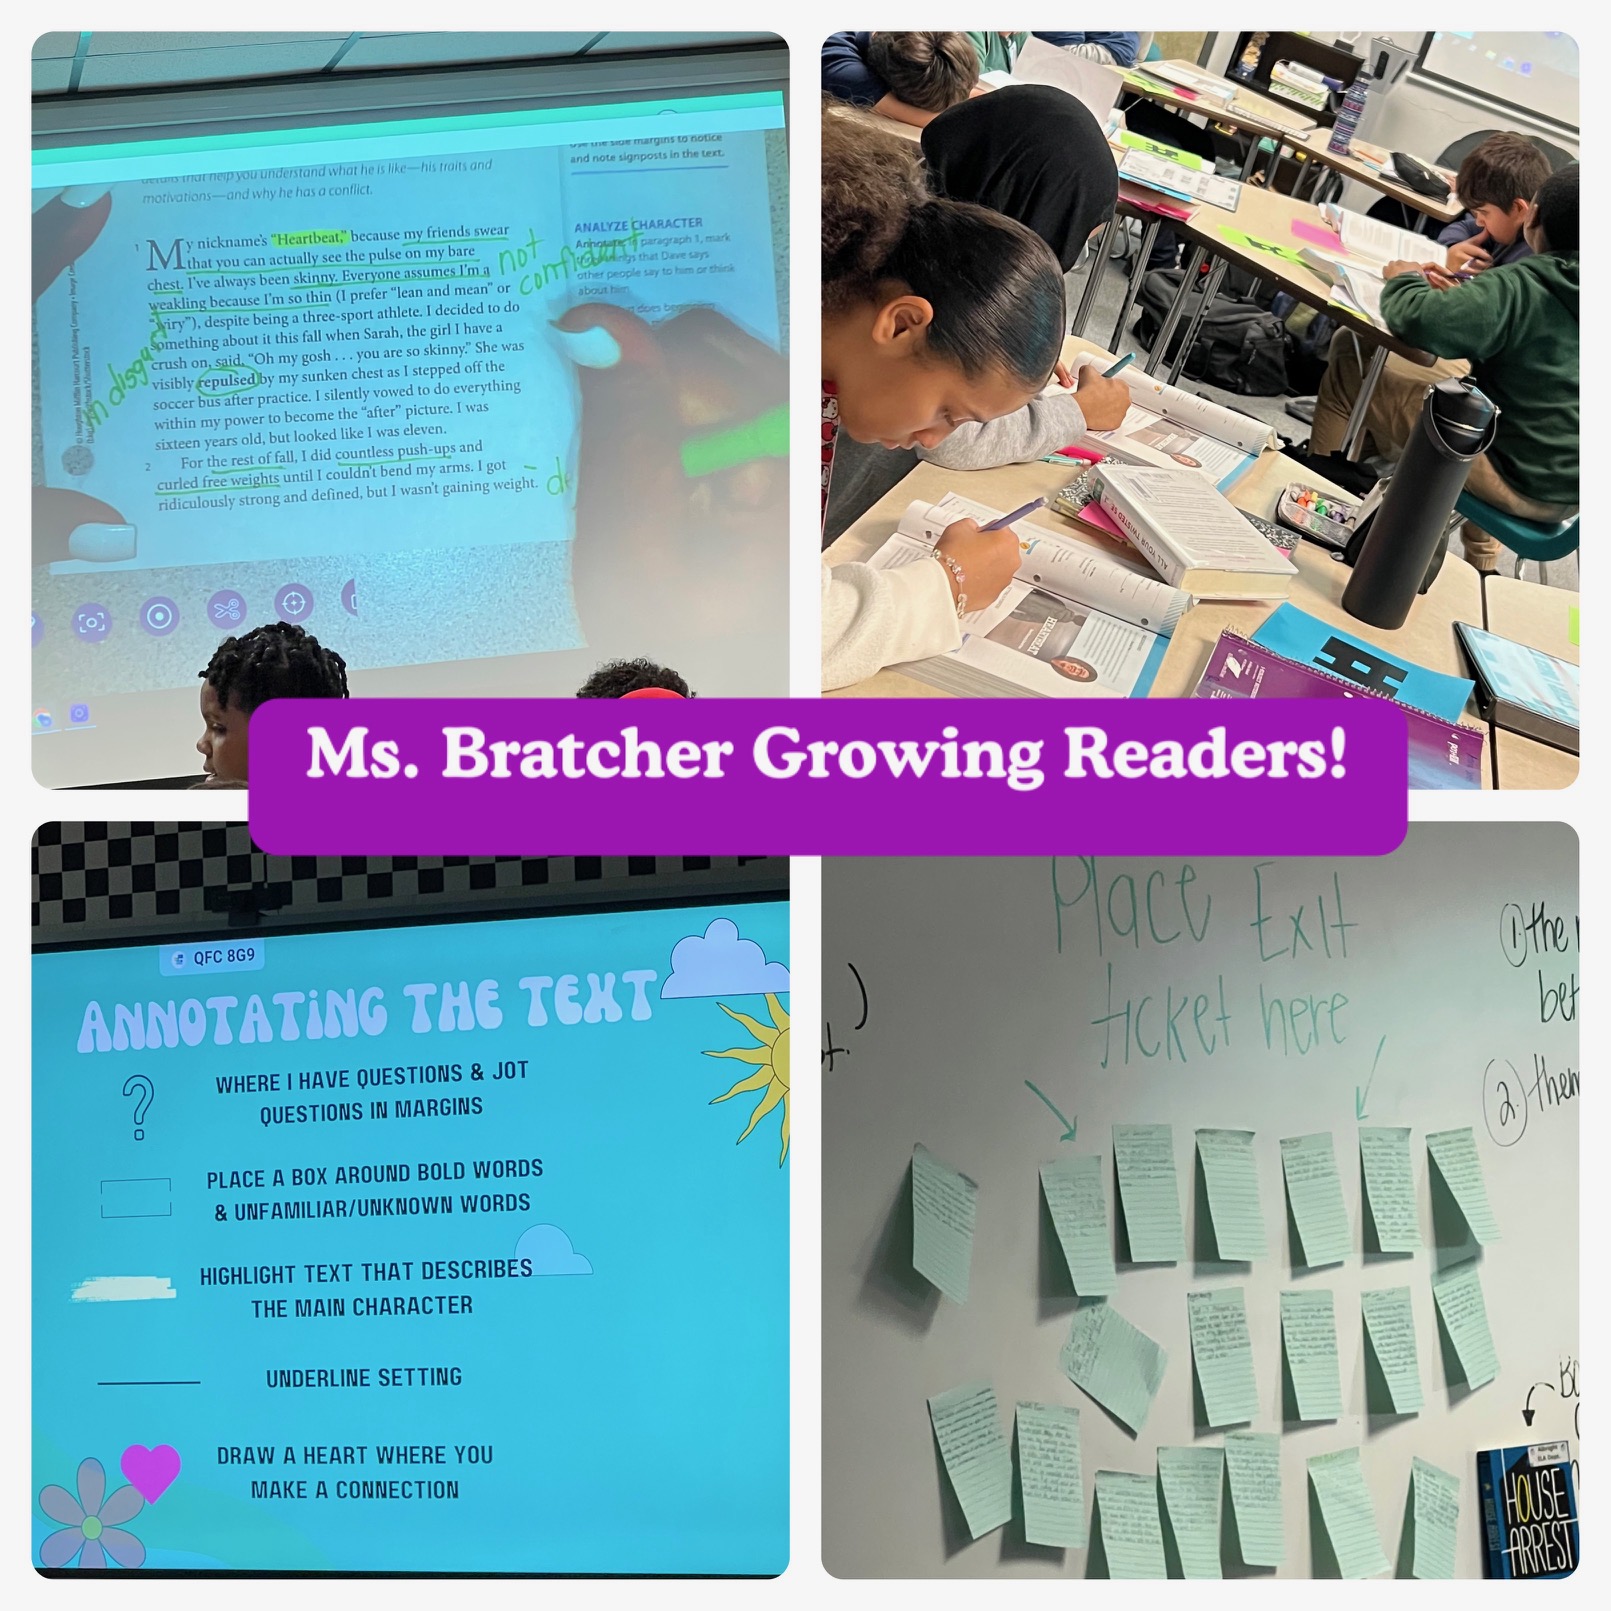 Ms. Bratcher Growing writers